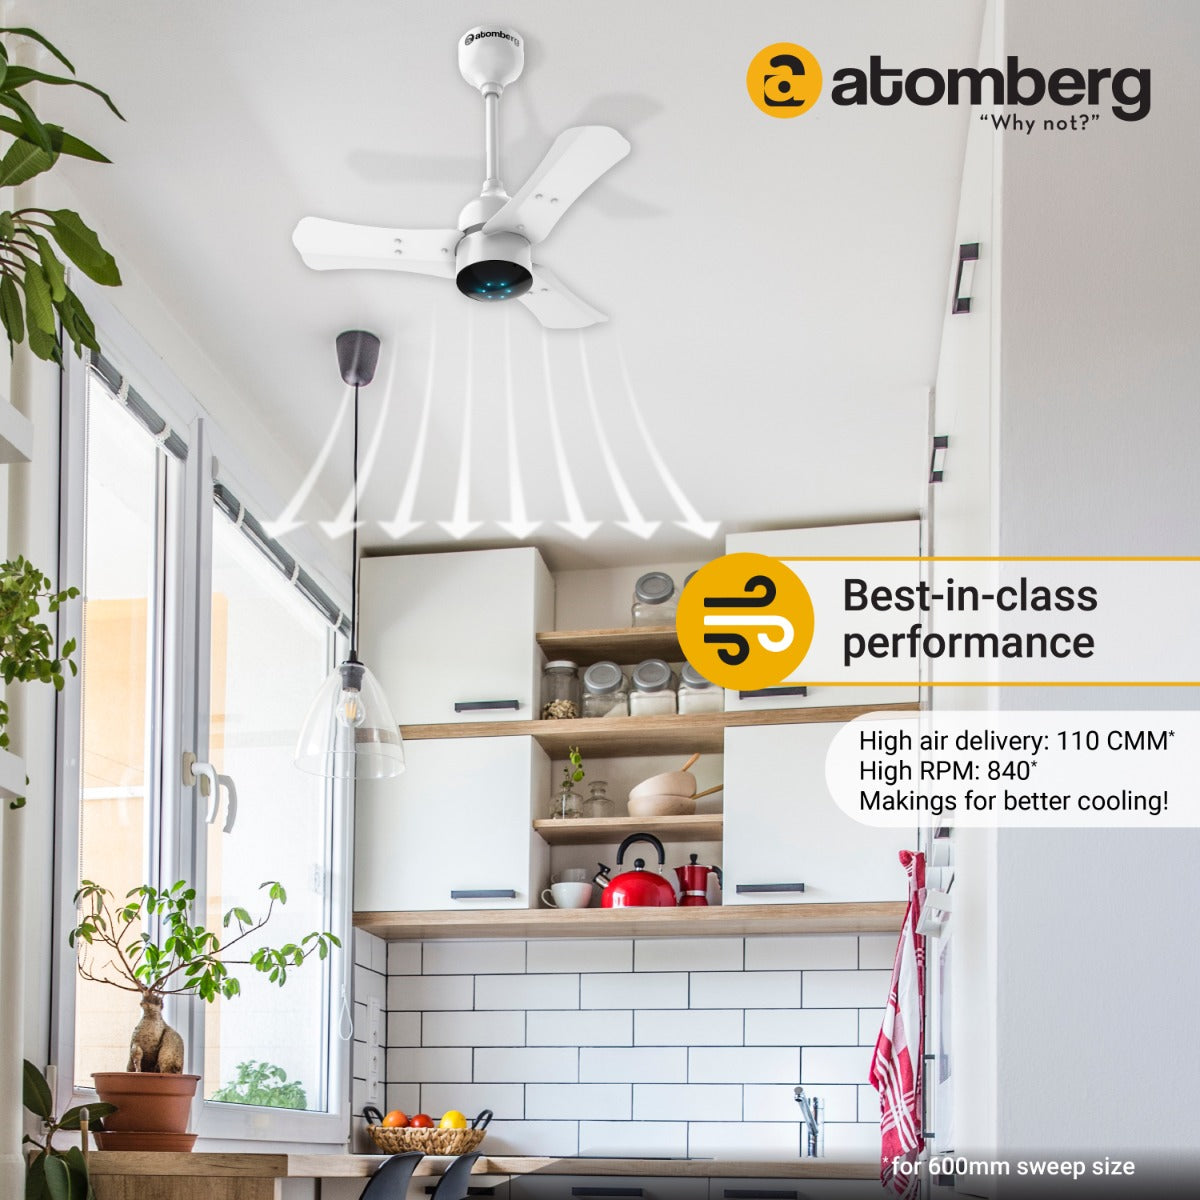 Atomberg Renesa 600mm BLDC motor Energy Saving Ceiling Fan with Remote Control  Pearl White